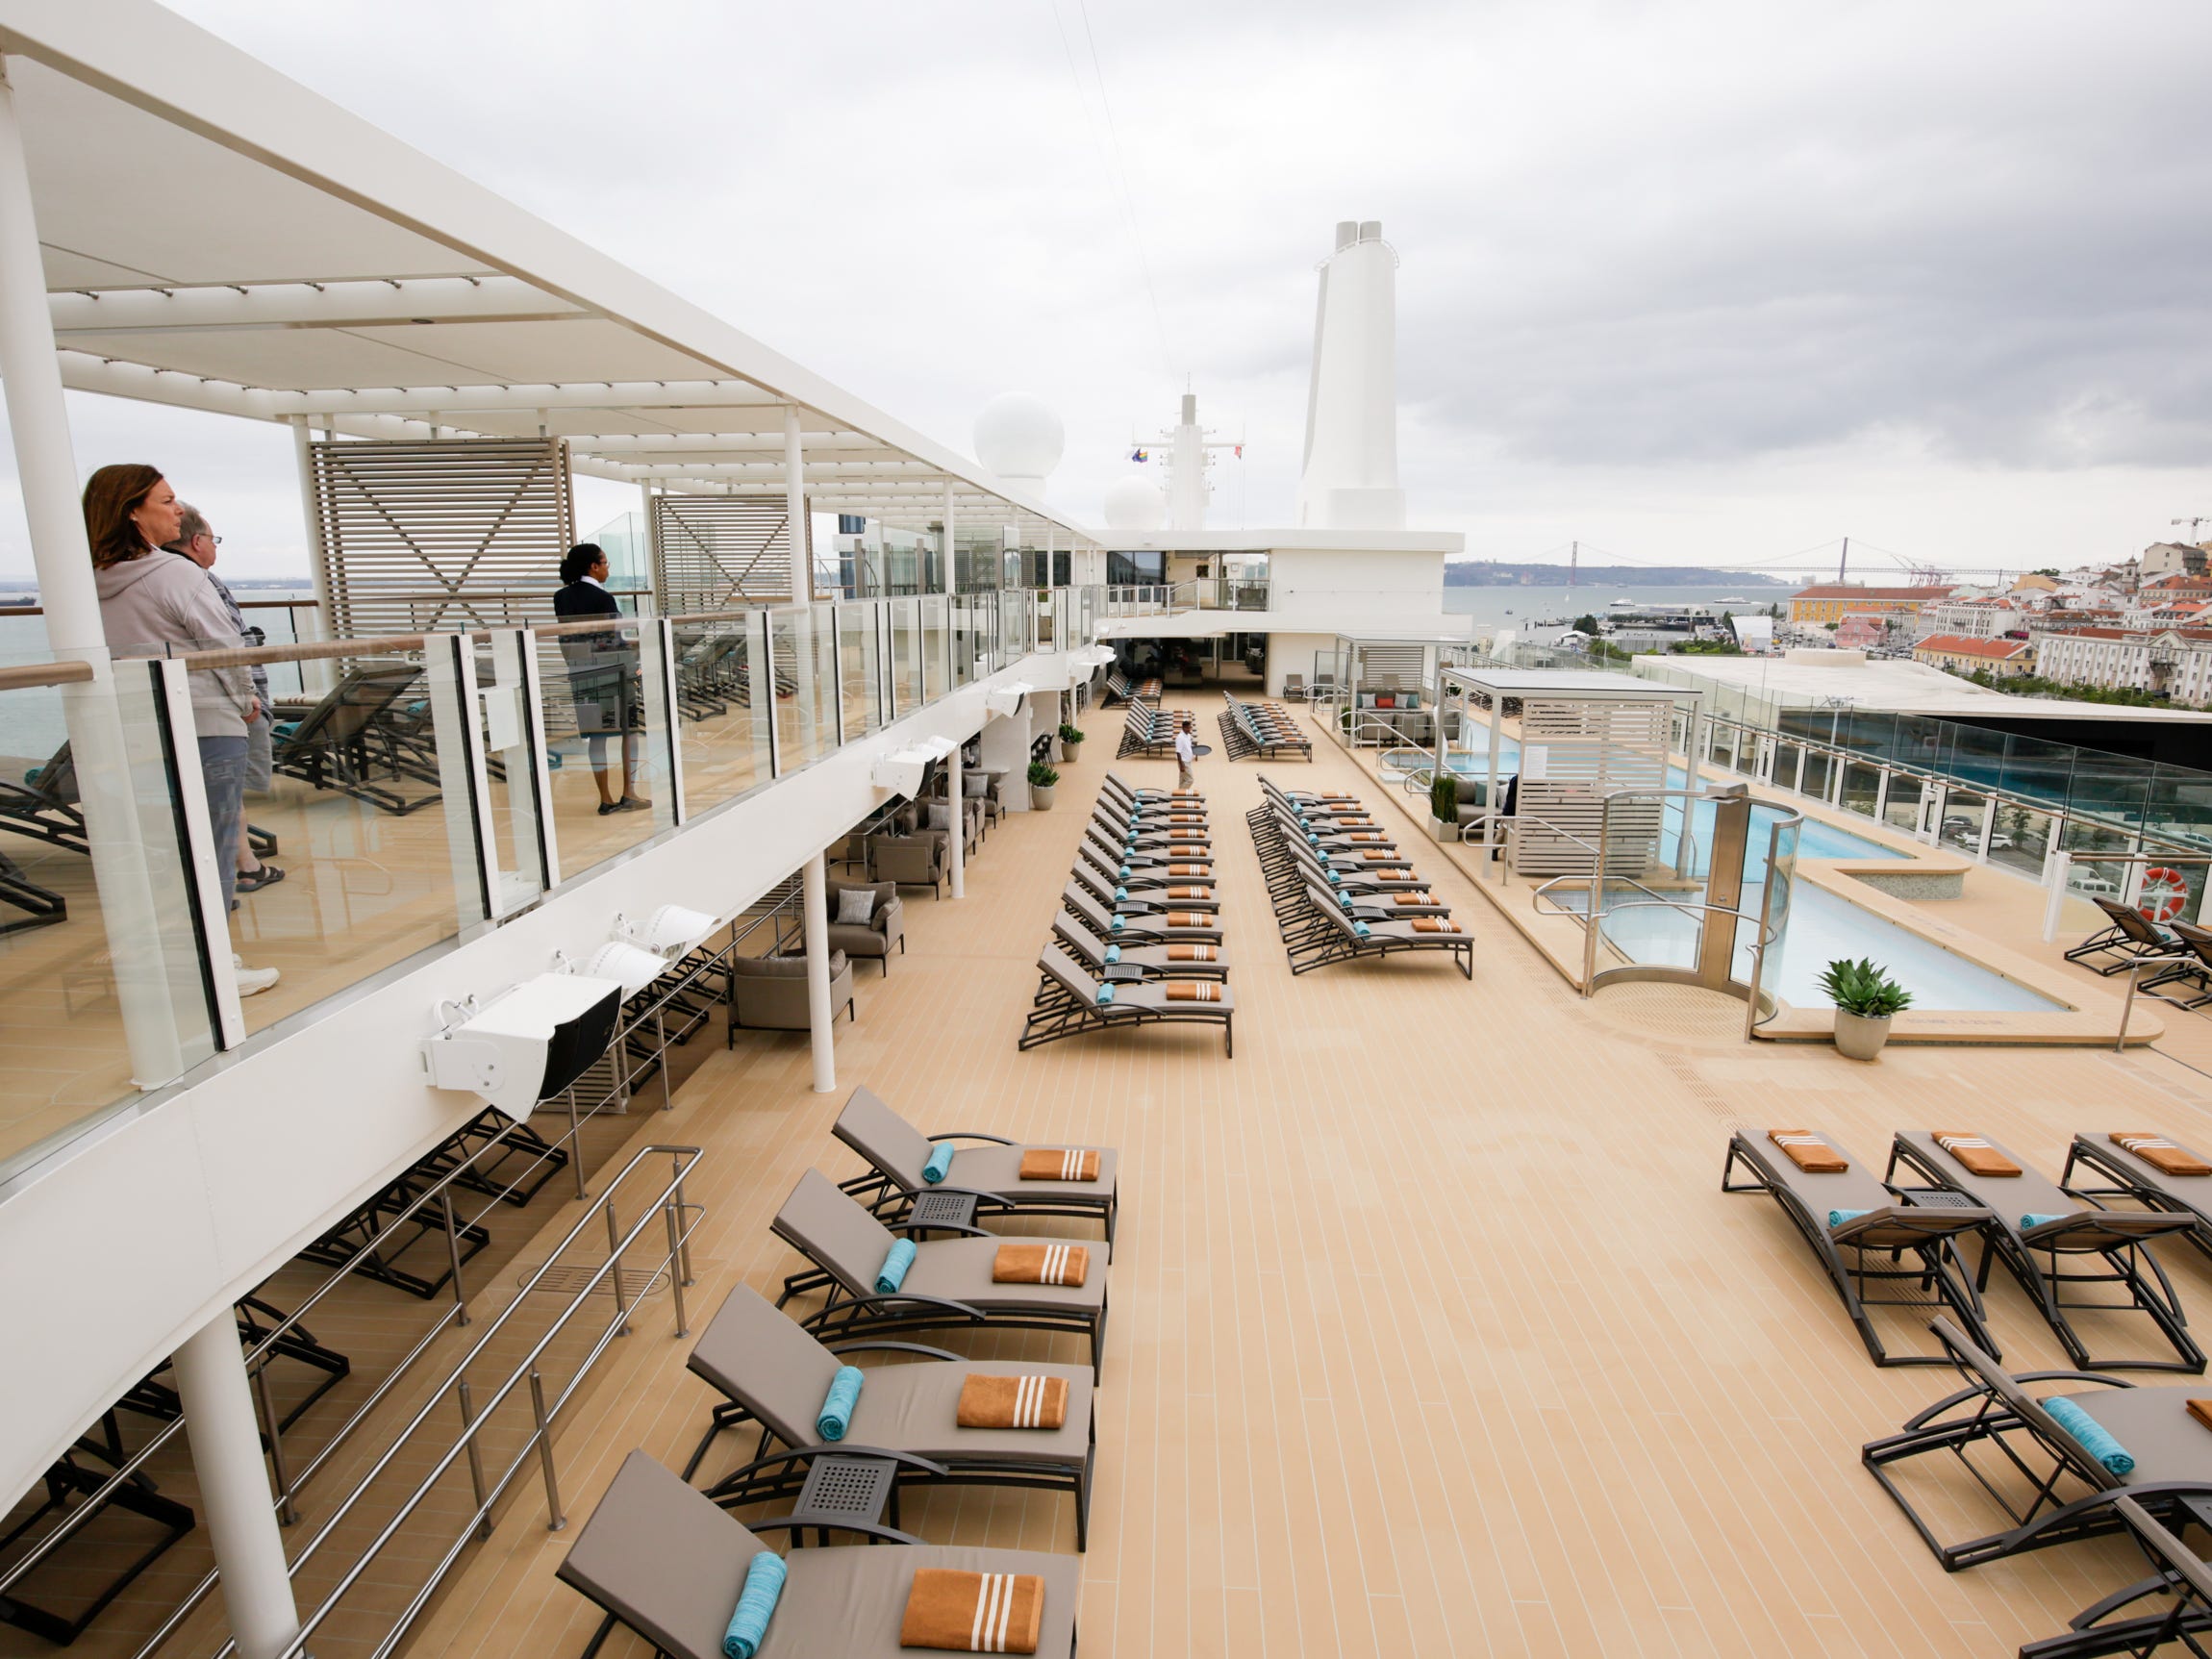 <p>But unlike most ships, the pool isn't surrounded by lounge chairs. Instead, it's off-centered and closer to the vessel's edge, giving swimmers a panoramic view of Silver Ray's surroundings instead of sunbathers' toes.</p>